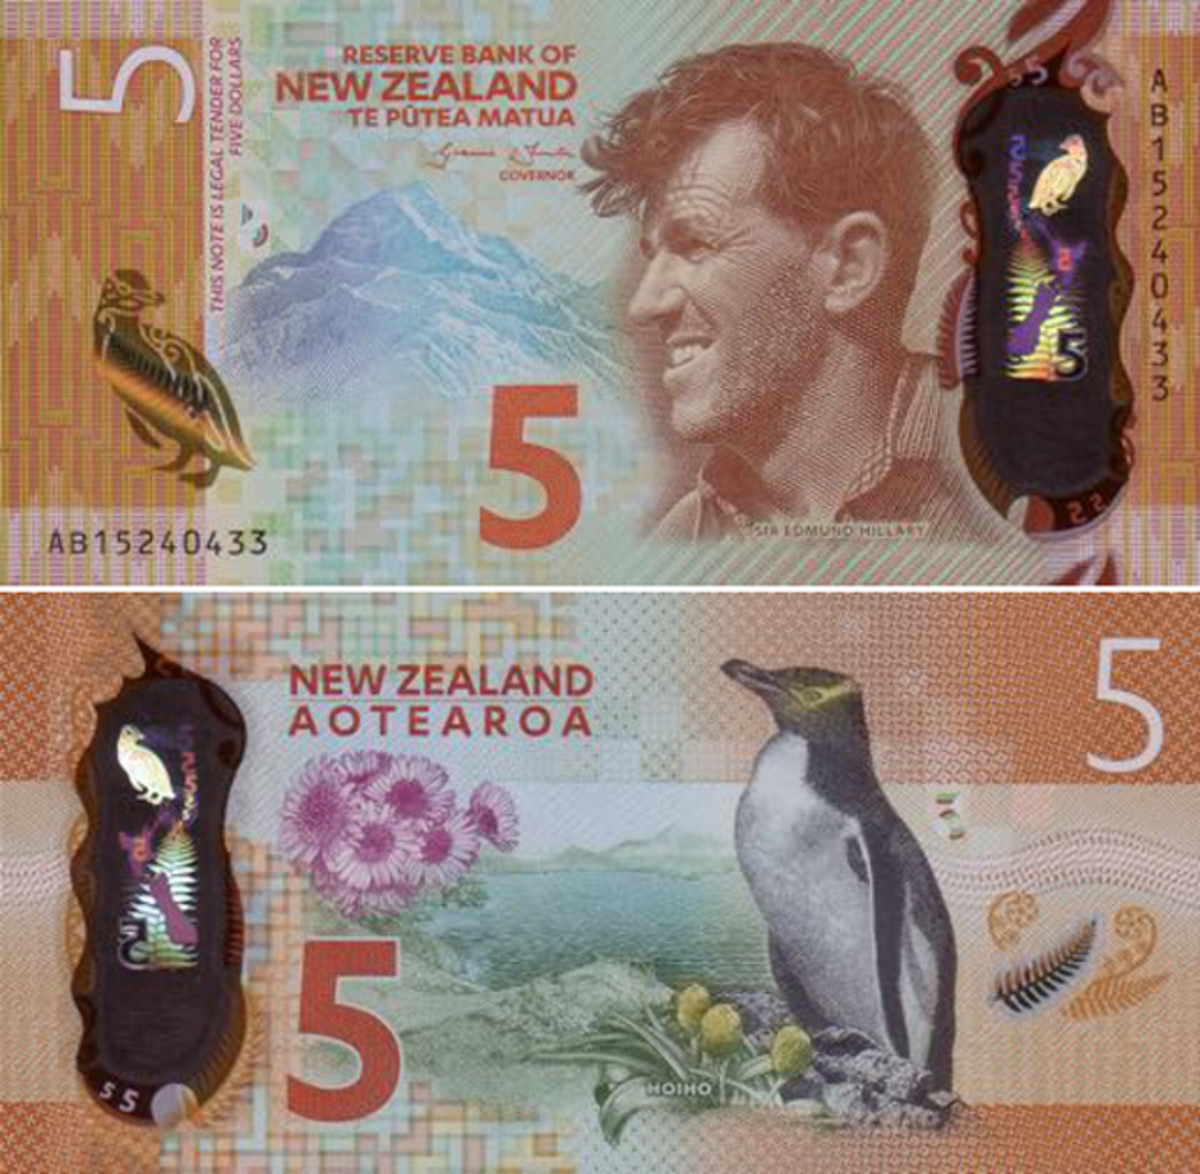 Front and back of the New Zealand $5 note depicting Sir Edmund Hillary, Mount Cook and a penguin that won the Bank Note of the Year award.